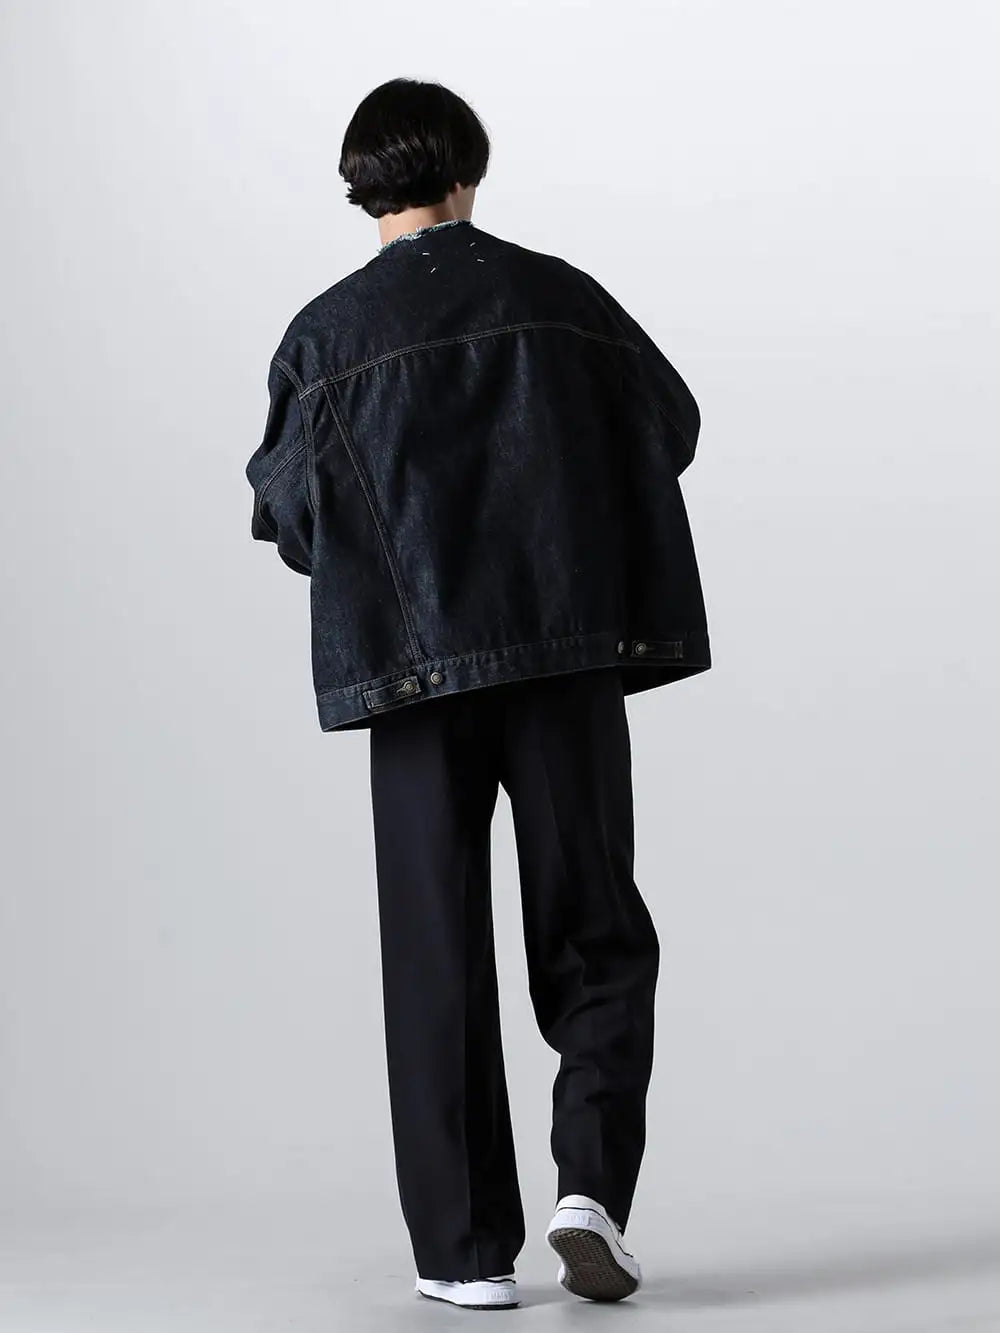 IRENISA 24SS Styling - A Jacket Bursting with Professionalism - S50AM0610 - Denim Jacket - IH-24SS-T006-AG-Black-Black-cord - Short Sleeved T-Shirt Black × Black cord - IH-24SS-P018-ND-Dark-Navy - Two Tucks Wide Trousers Dark Navy - A02FW704-white-classic - BAKER Original sole canvas Low cut sneaker White 1-003